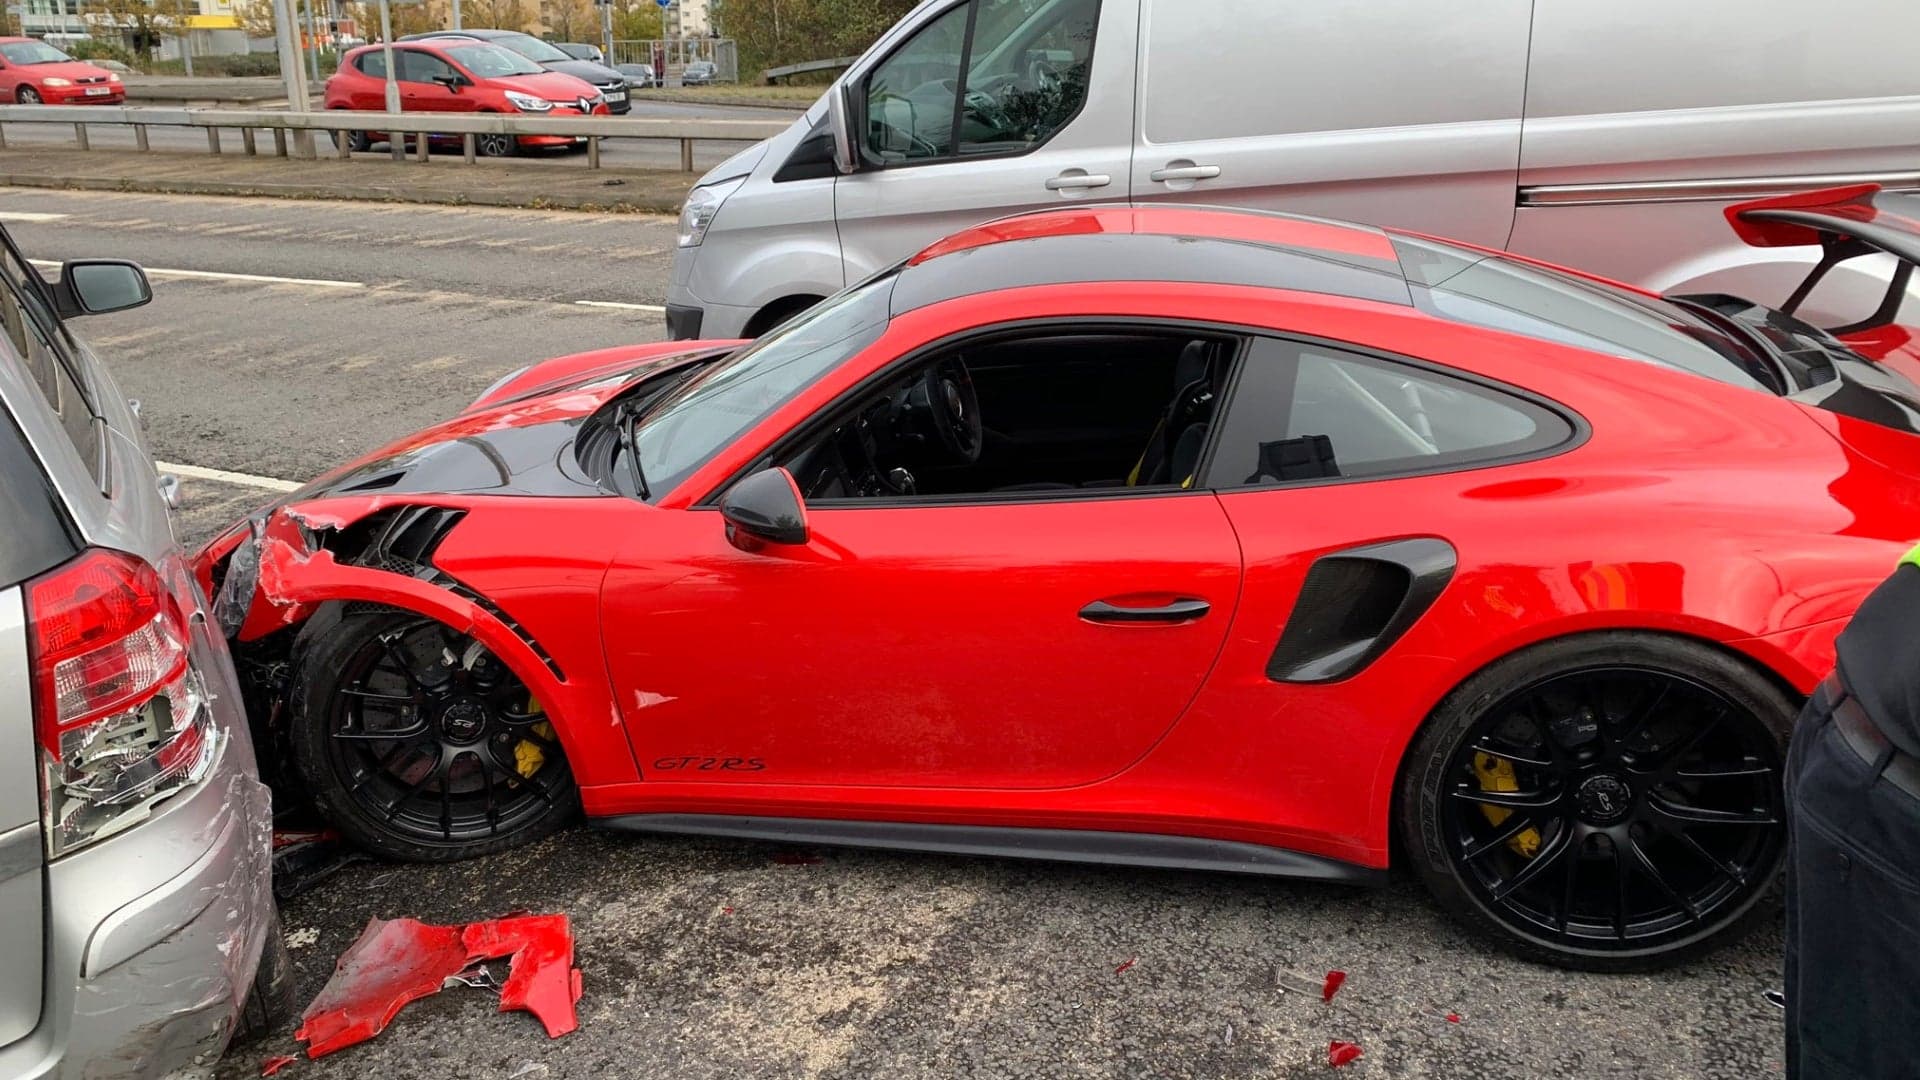 Man Crashes Brand-New Porsche 911 GT2 RS Just Minutes After Going on Test Drive